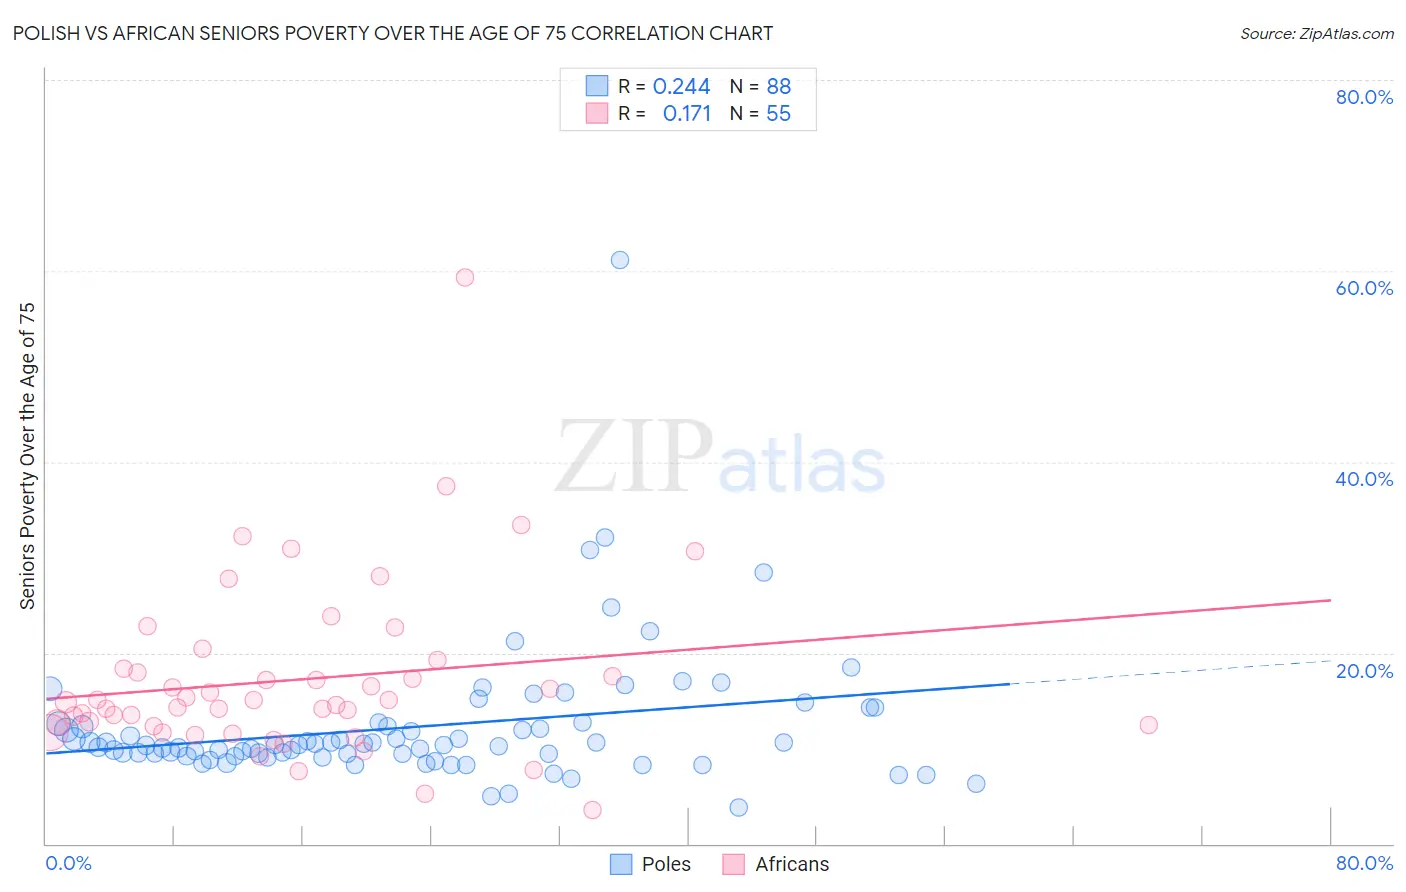 Polish vs African Seniors Poverty Over the Age of 75